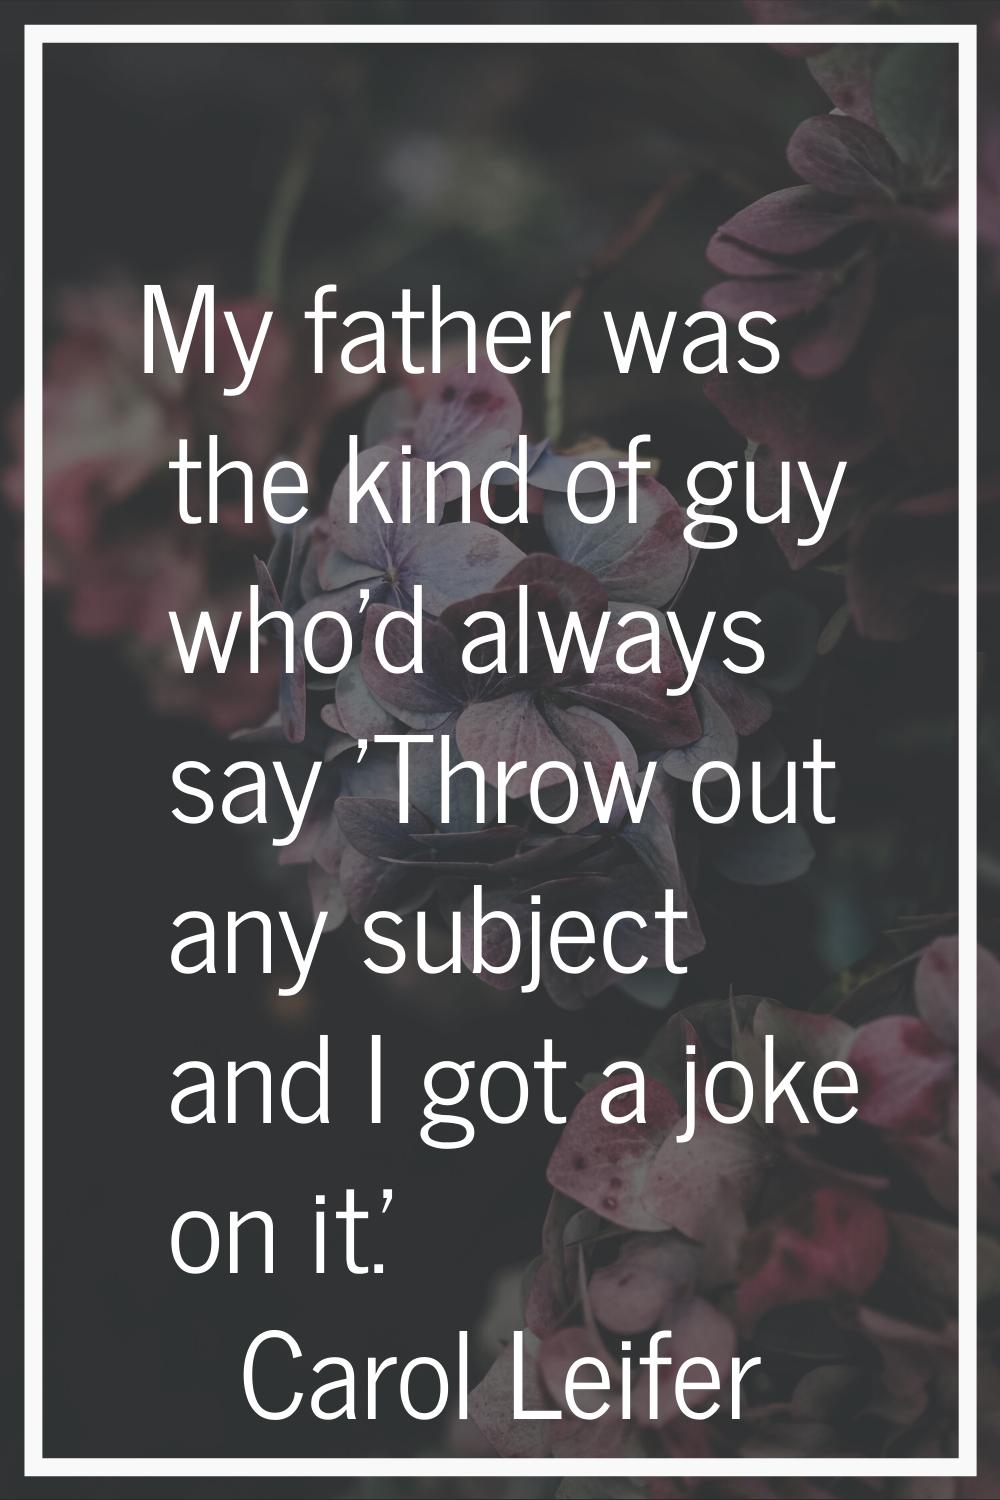 My father was the kind of guy who'd always say 'Throw out any subject and I got a joke on it.'